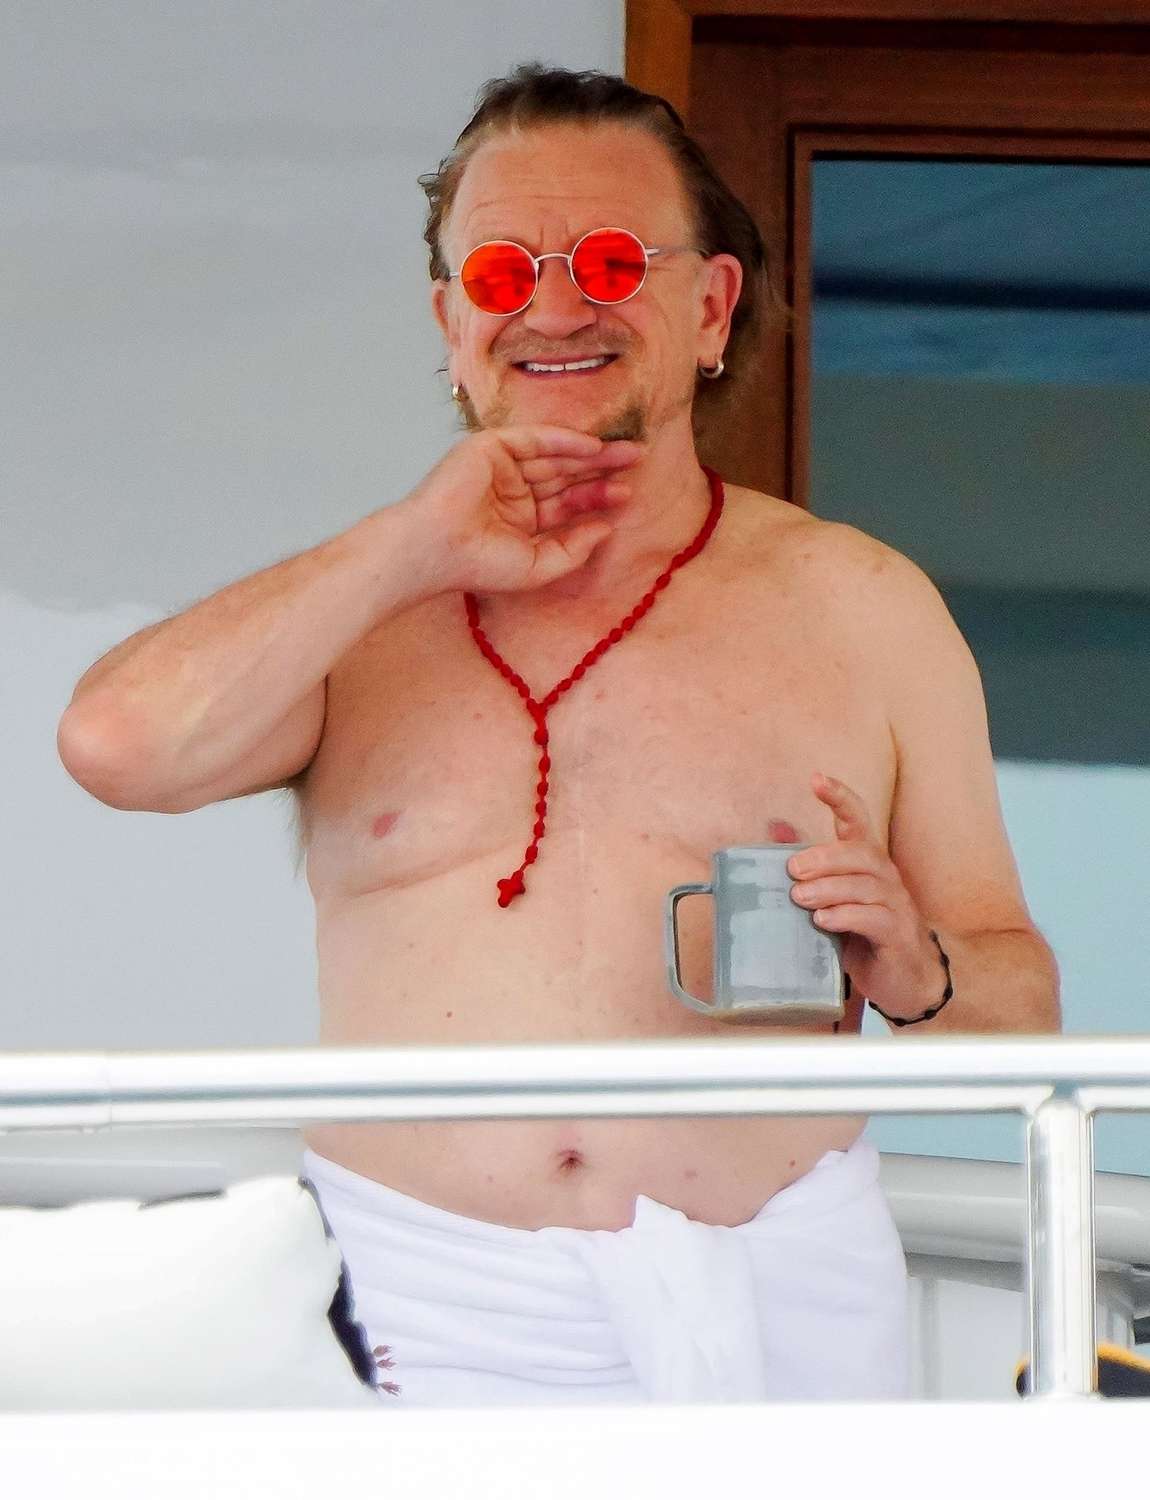 U2 Singer Bono pictured showing off his impressive physique while enjoying his coffee onboard his mega yacht in St Tropez.